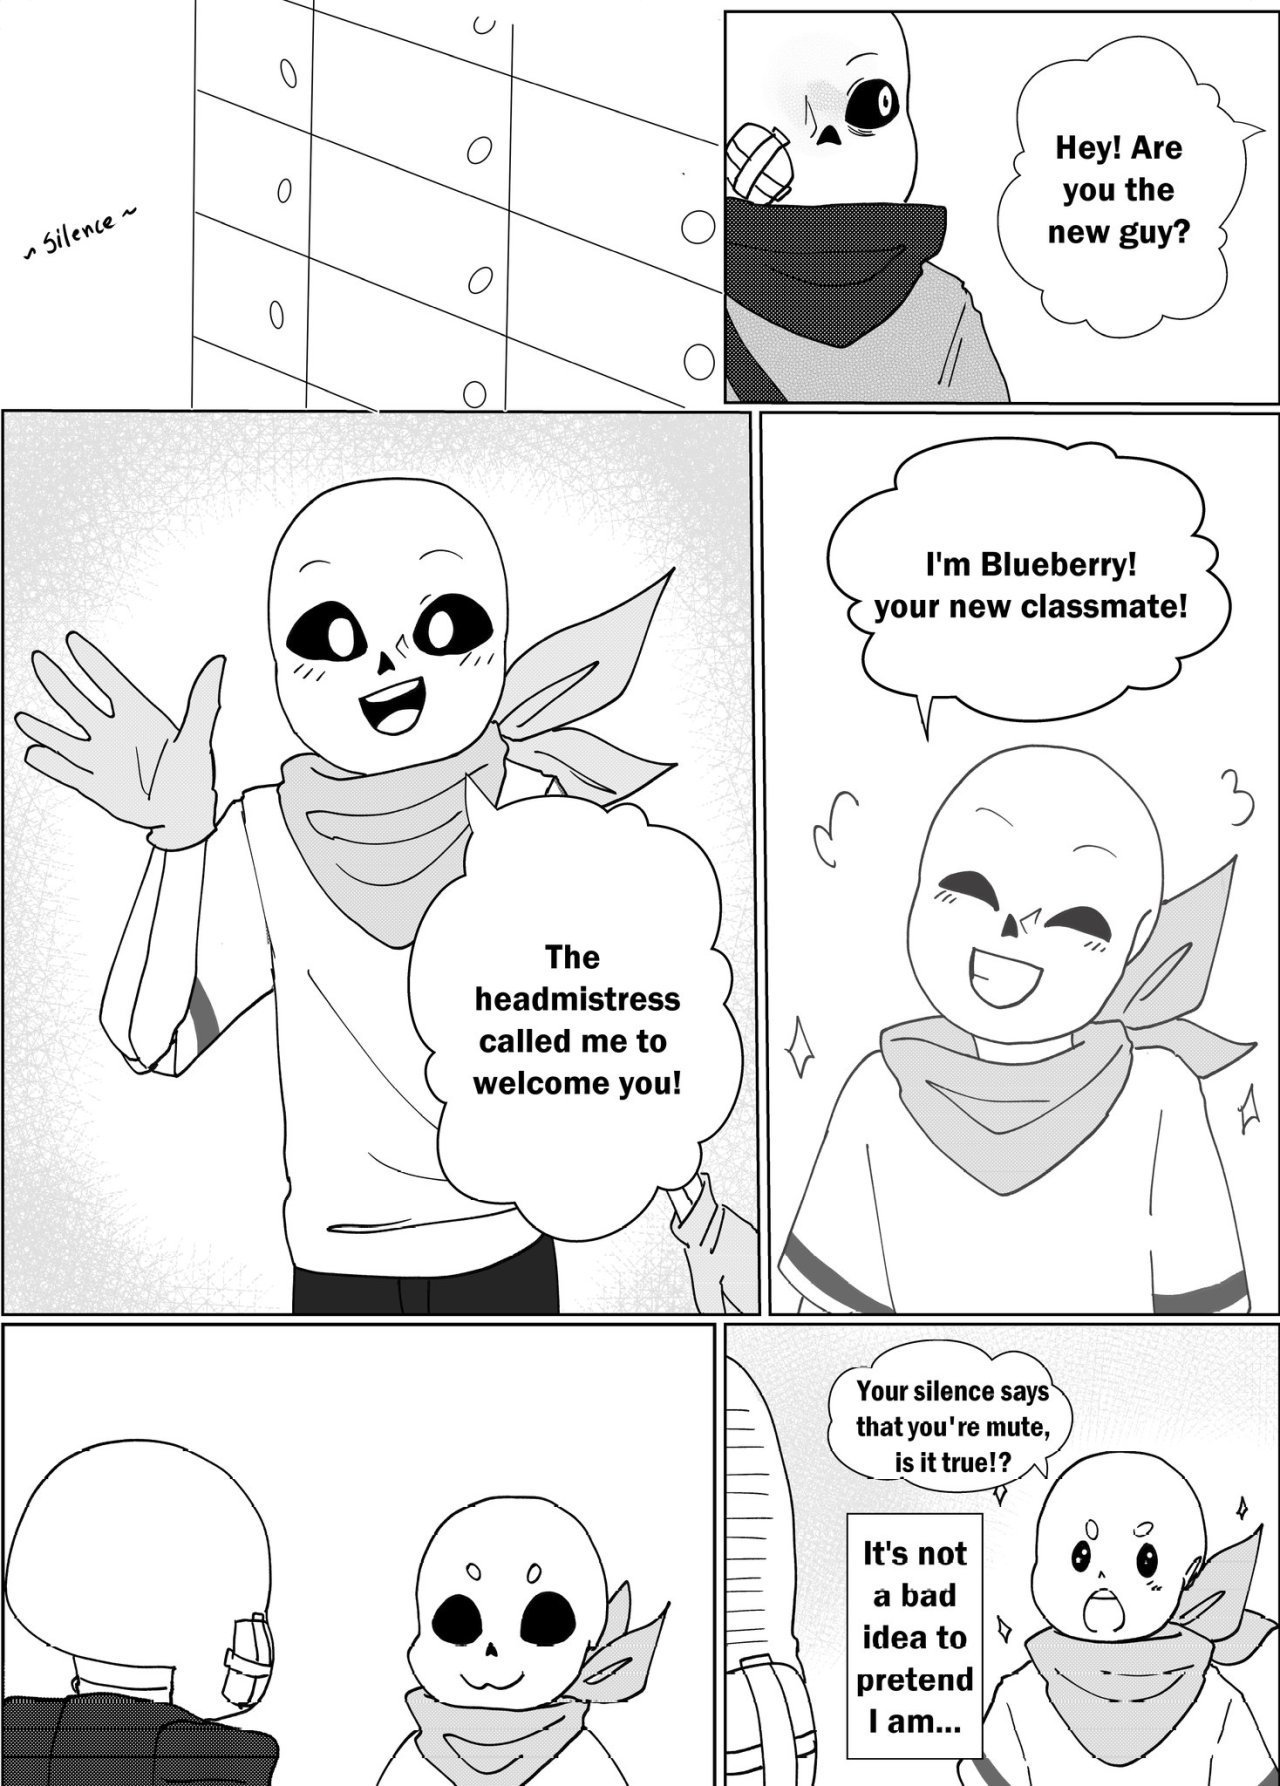 I'm Ink Sans? Really? - Chapter One - Page 2 - Wattpad